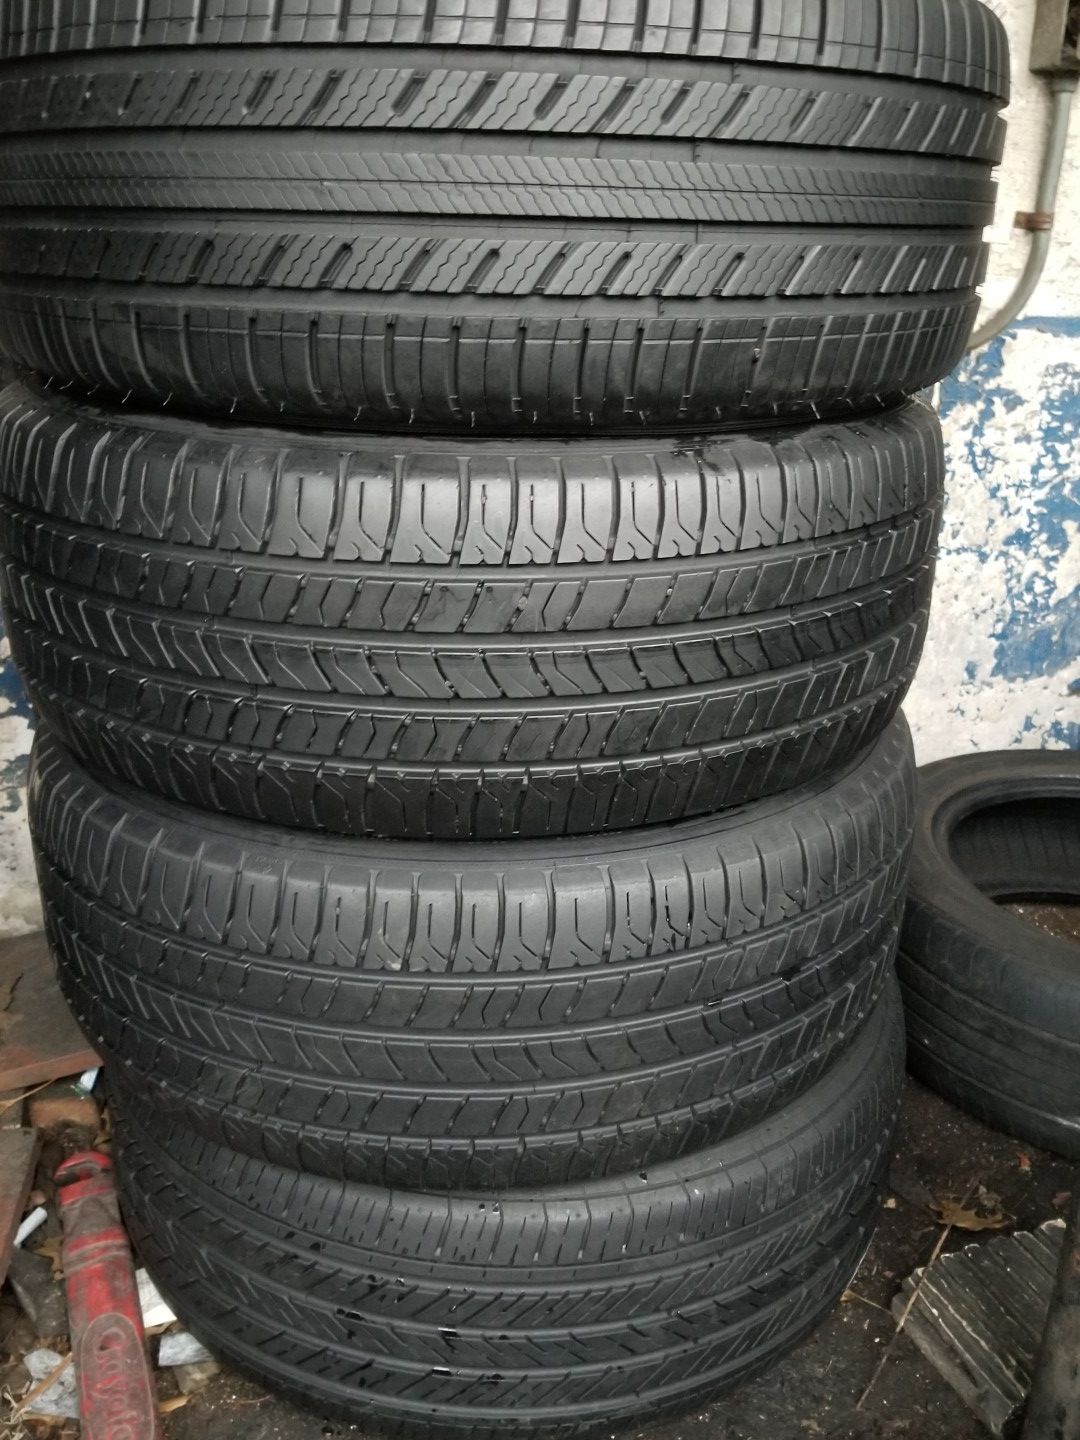 Four good set of Michelin tires for sale 225/50/17